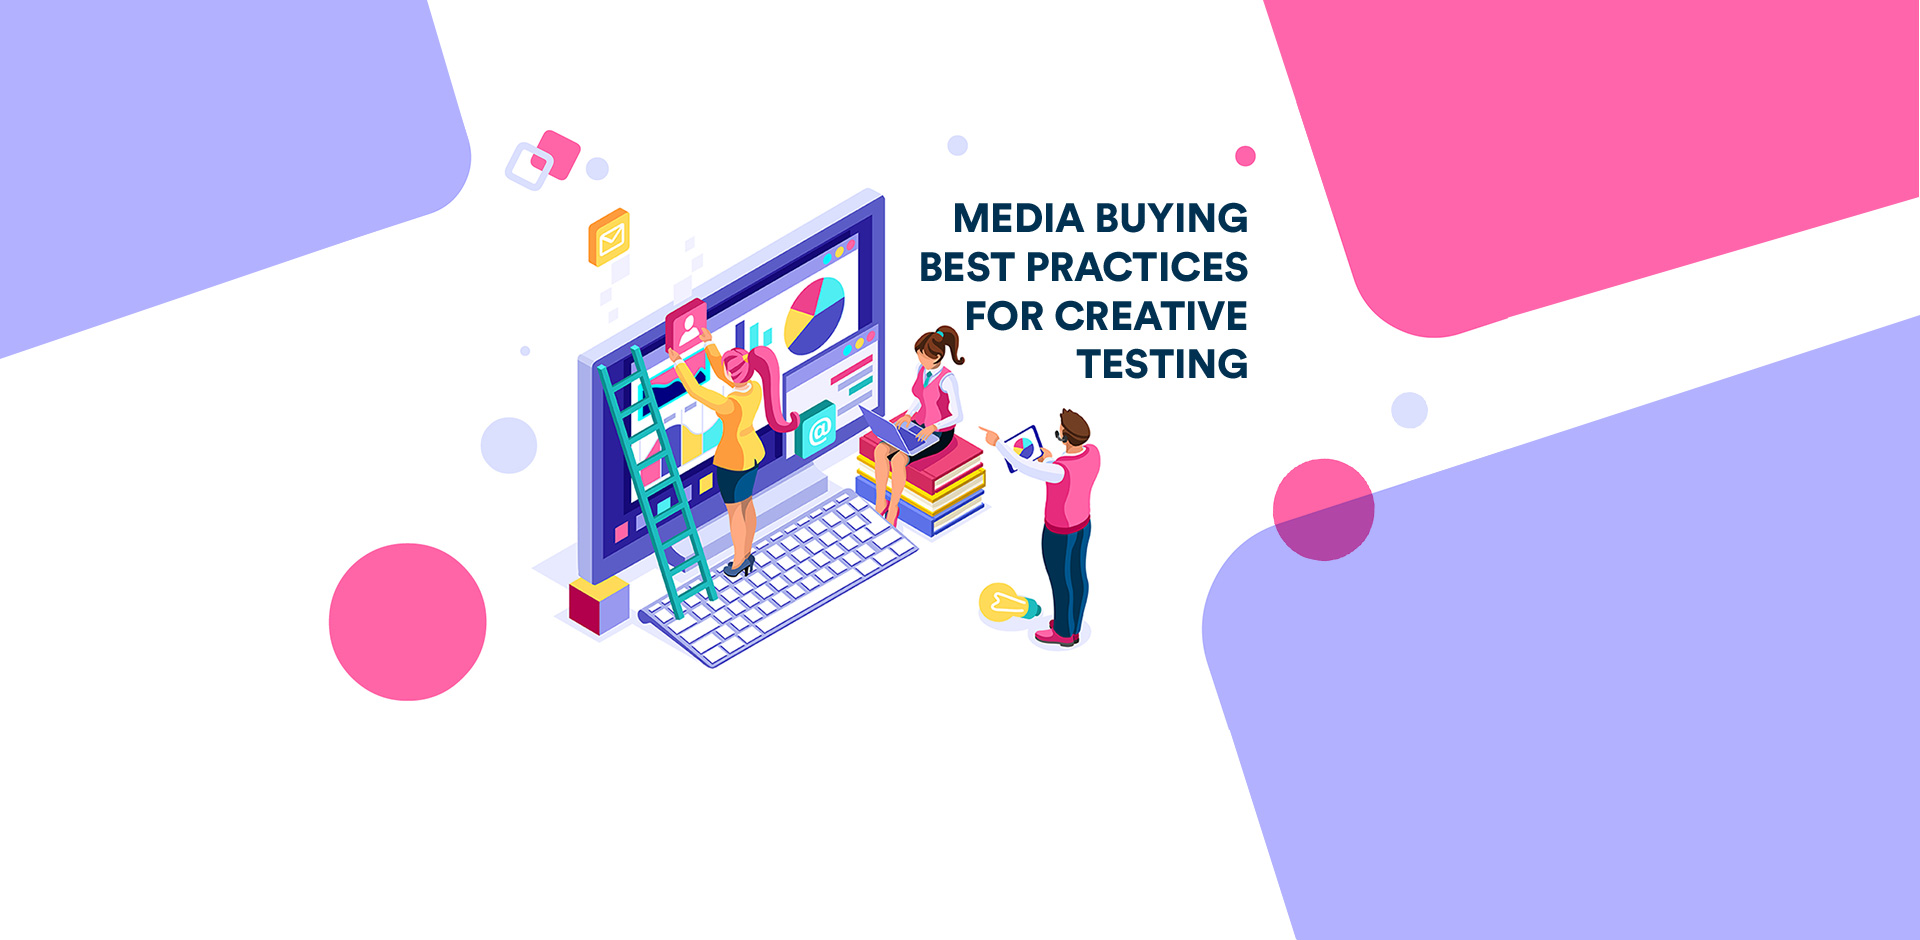 Media Buying Best Practices For Creative Testing